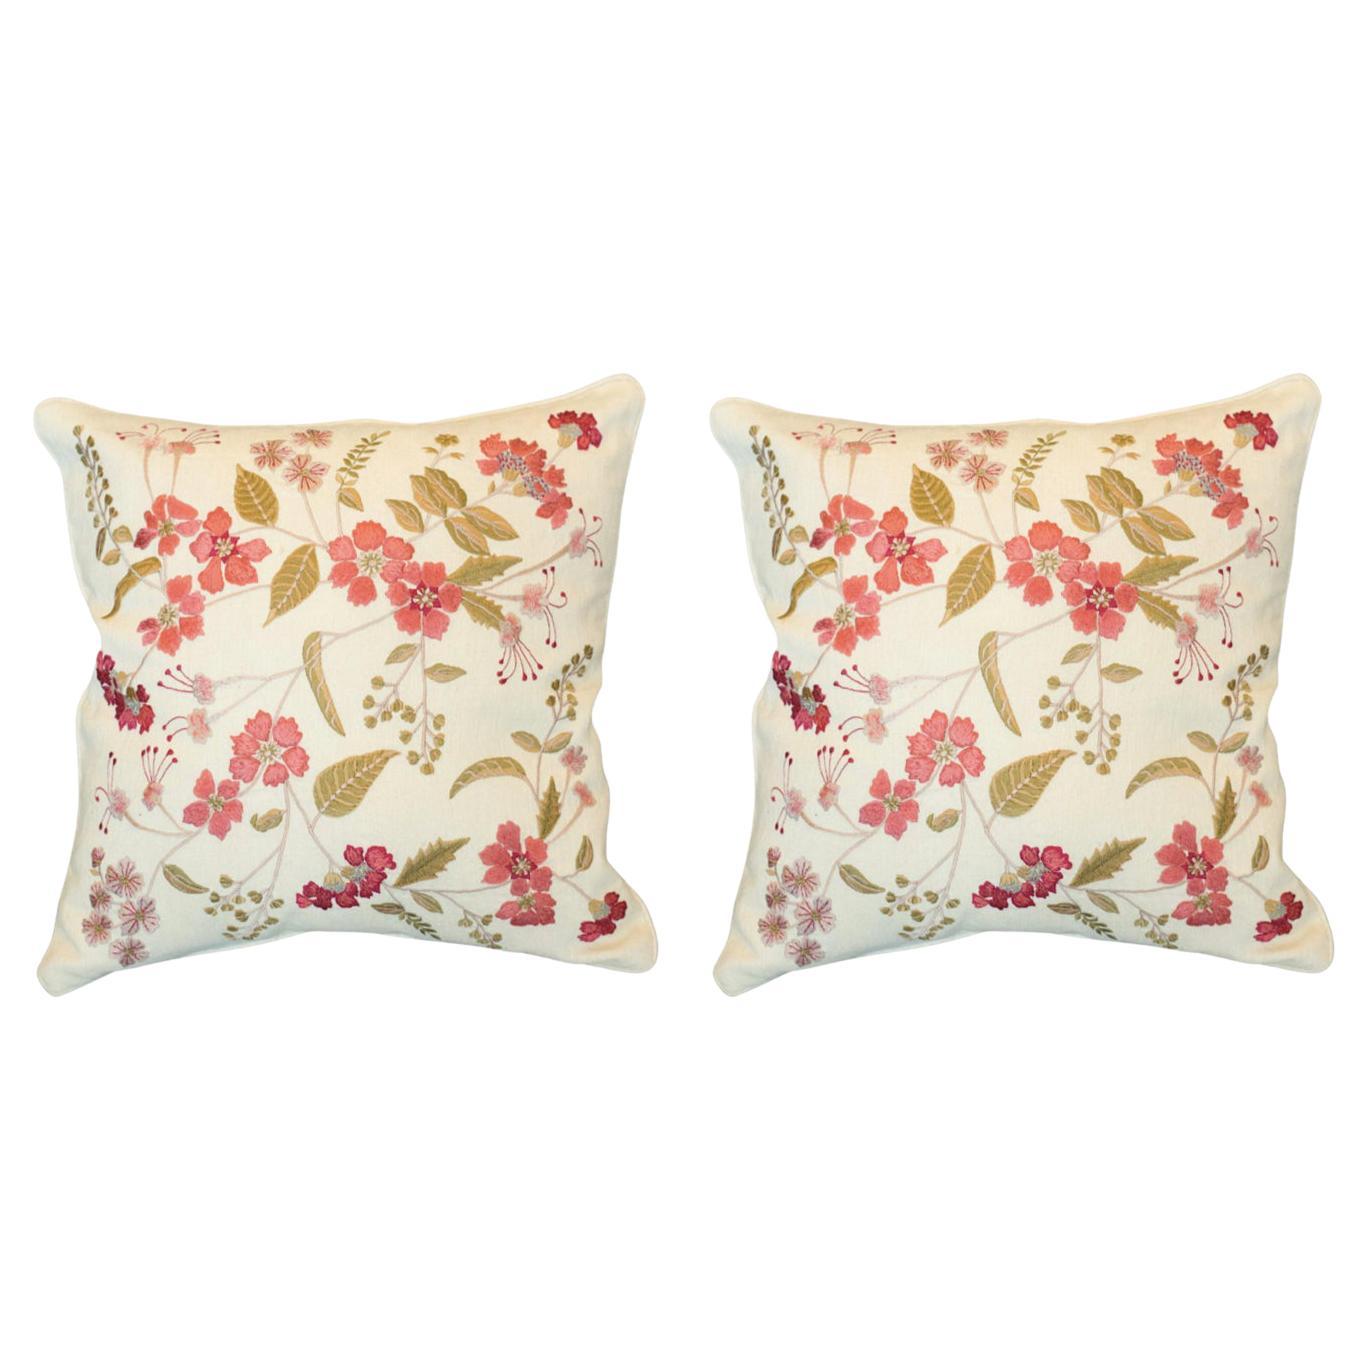 Contemporary Pair of Tassia Silk Pillows with Ornate Floral Embroidery